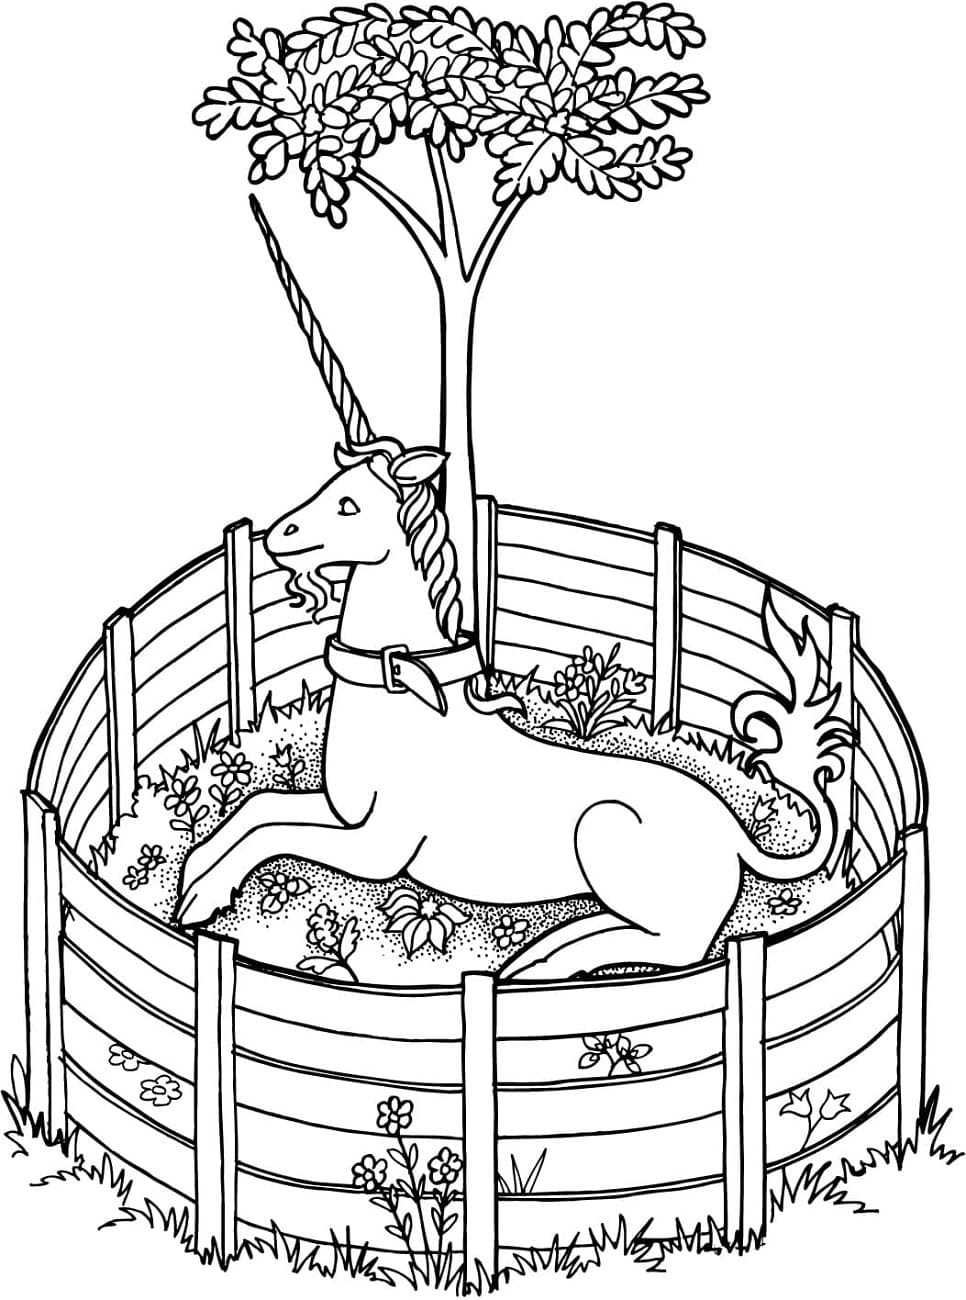 Unicorn In Cage Coloring Page